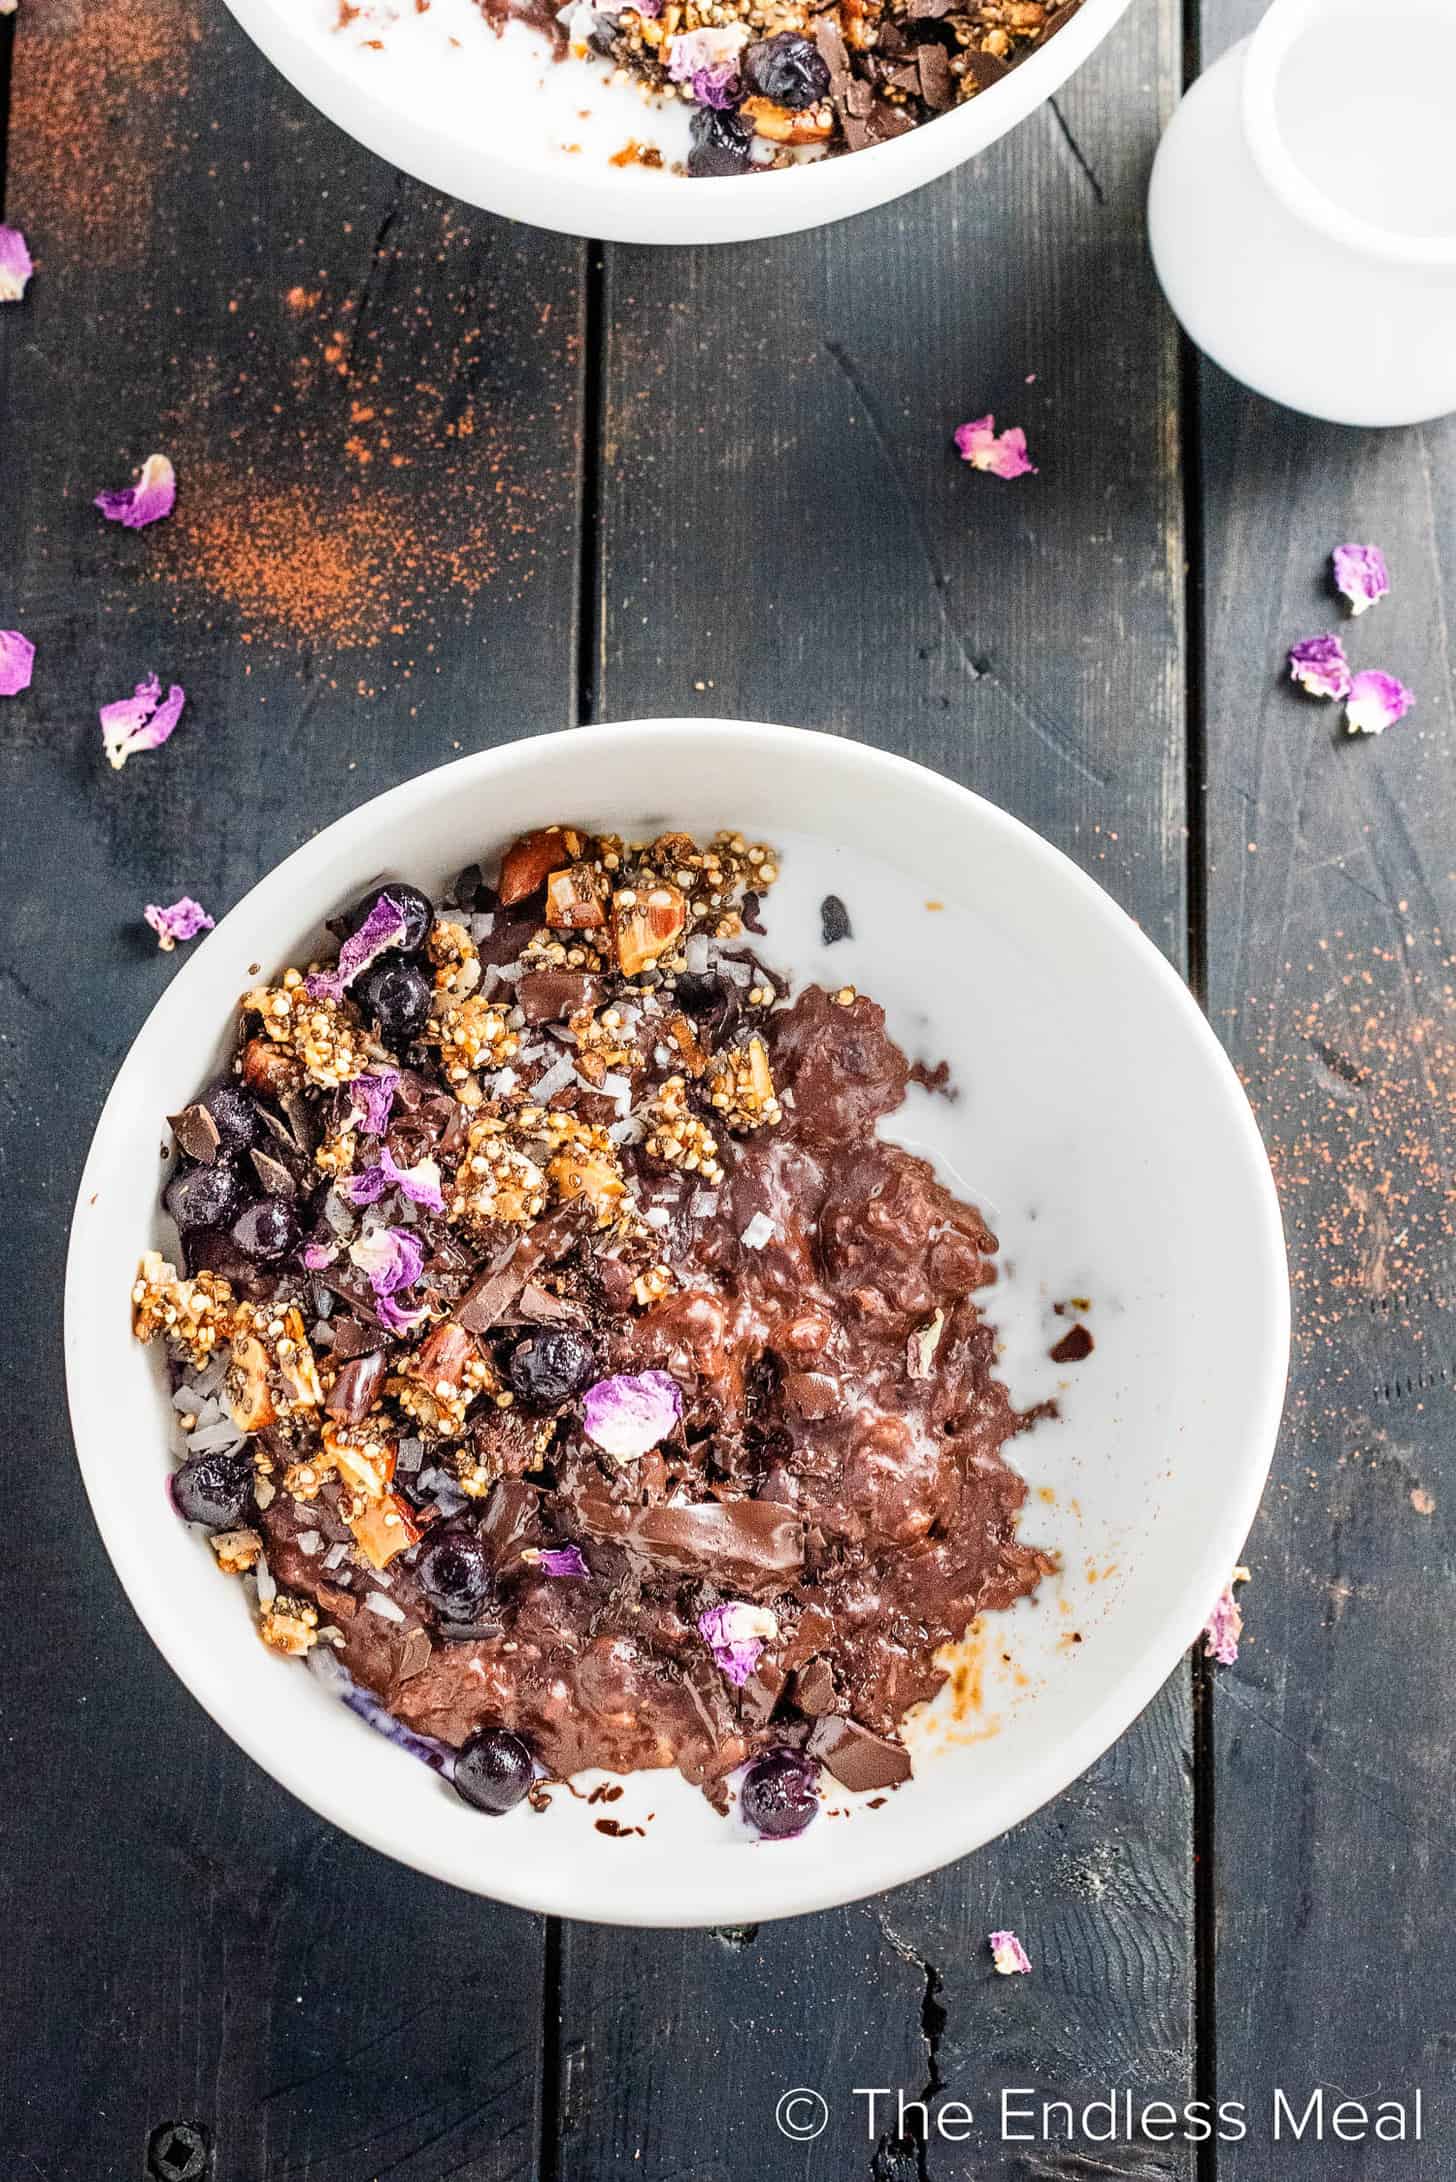 A bowl of Chocolate Oatmeal on a breakfast table.